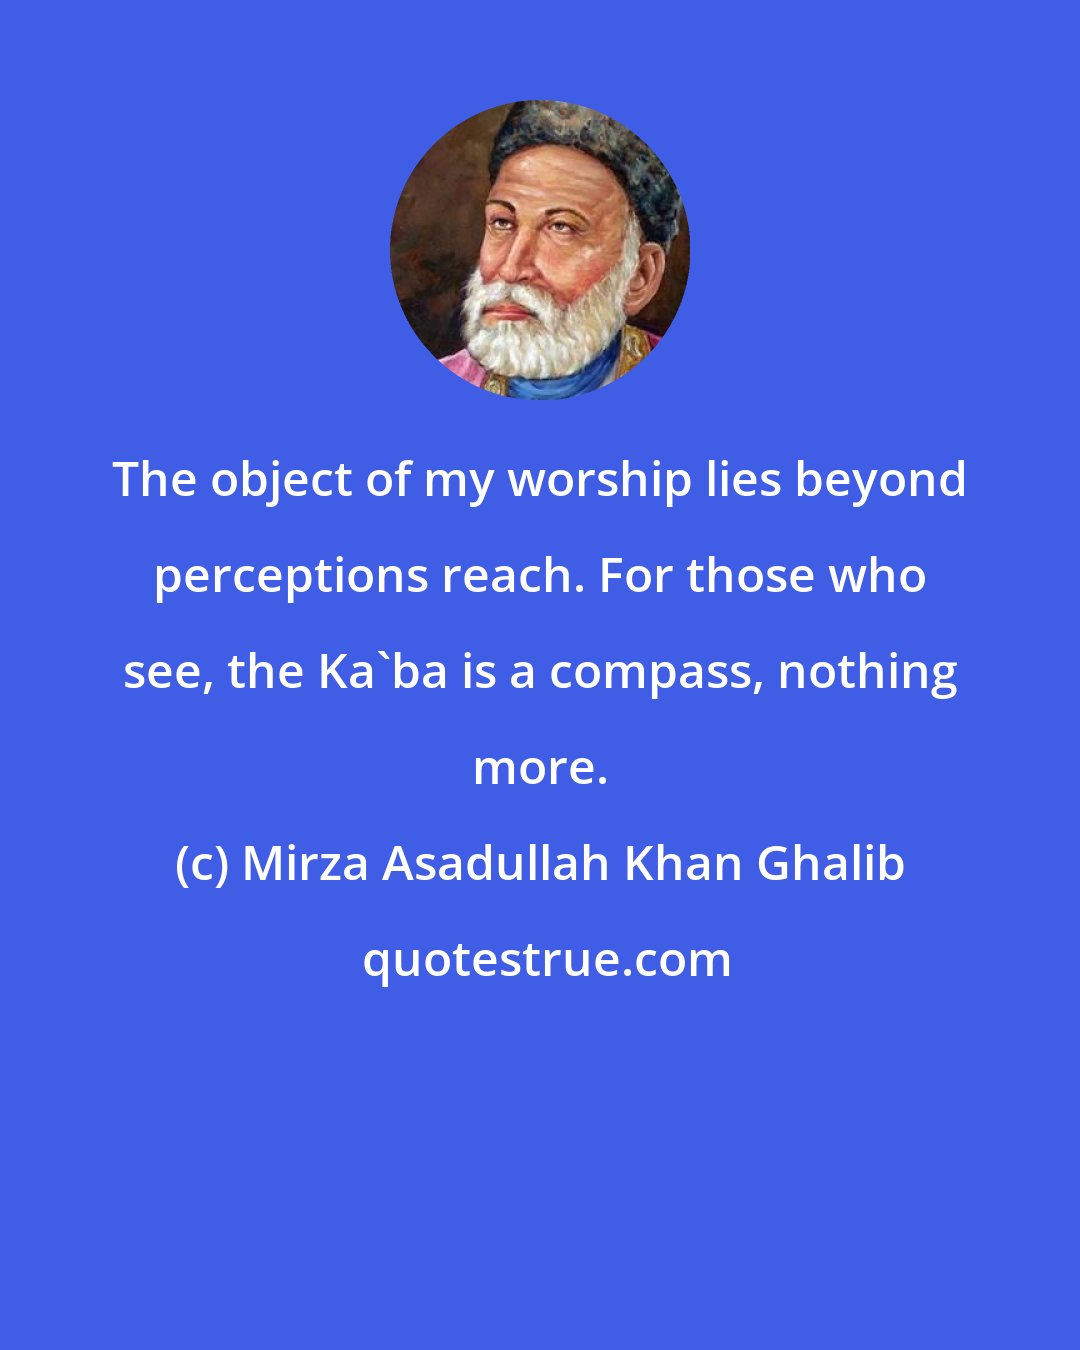 Mirza Asadullah Khan Ghalib: The object of my worship lies beyond perceptions reach. For those who see, the Ka'ba is a compass, nothing more.